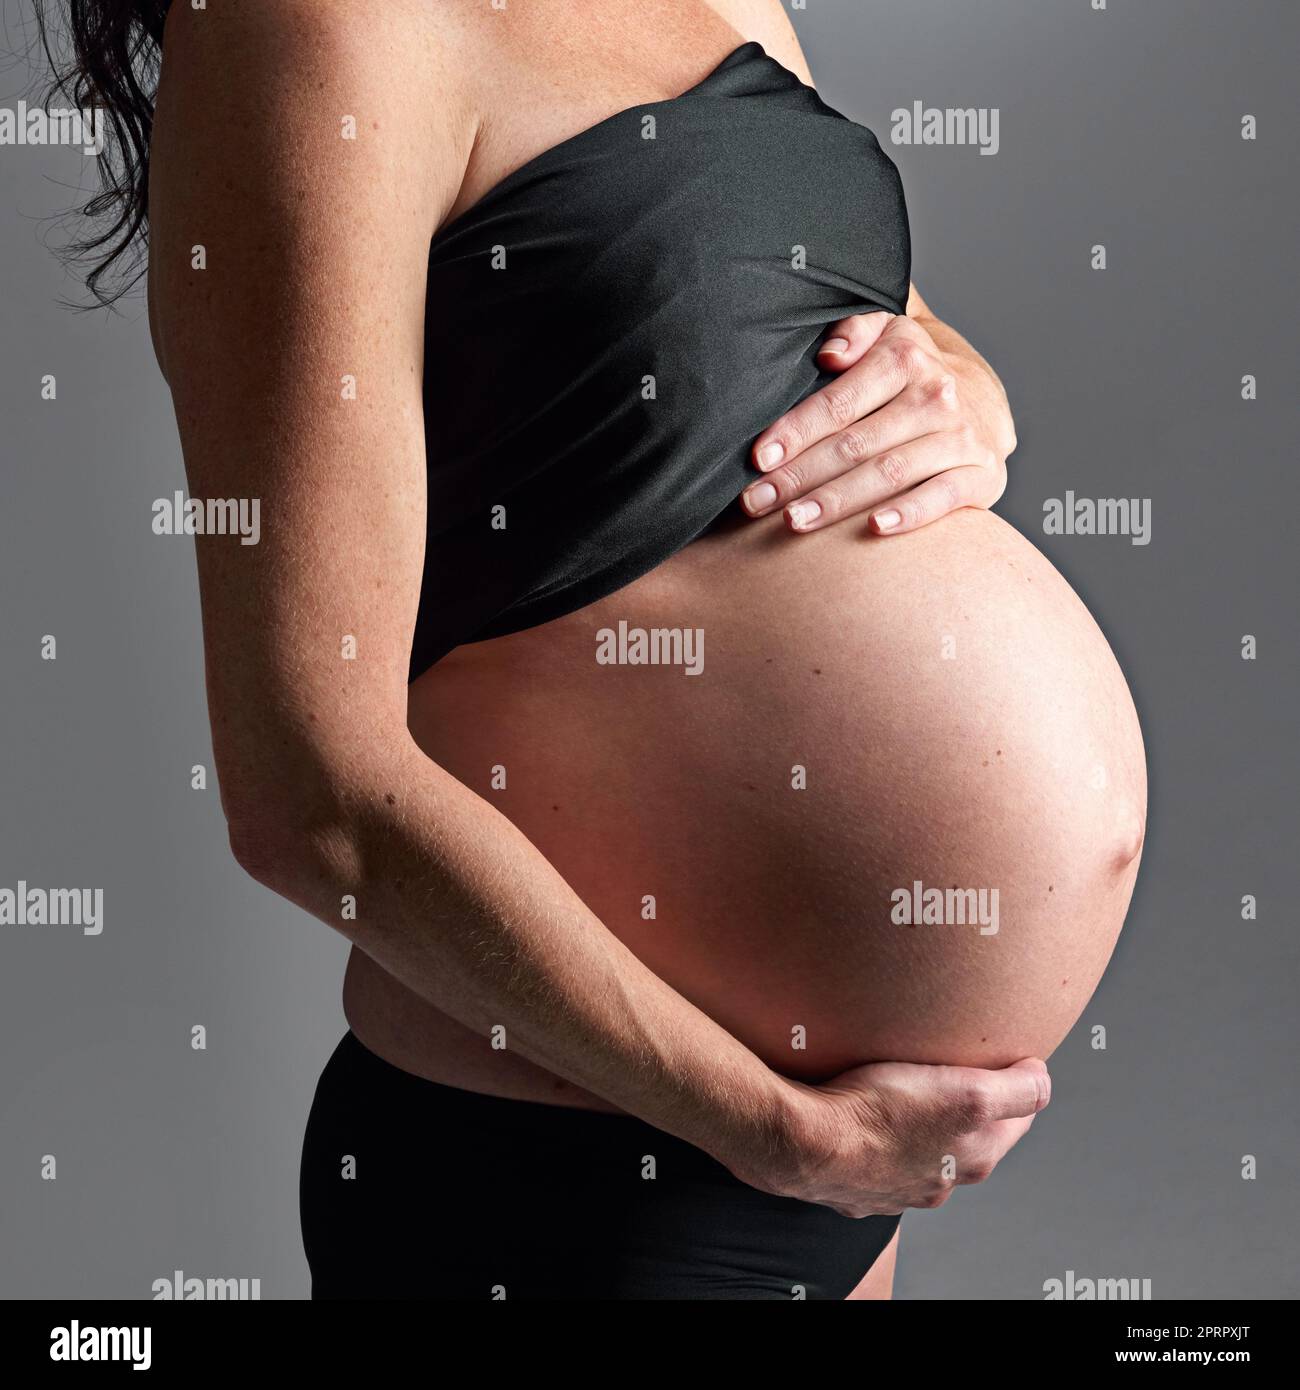 Expecting her arrival soon. A pregnant woman holding her tummy. Stock Photo